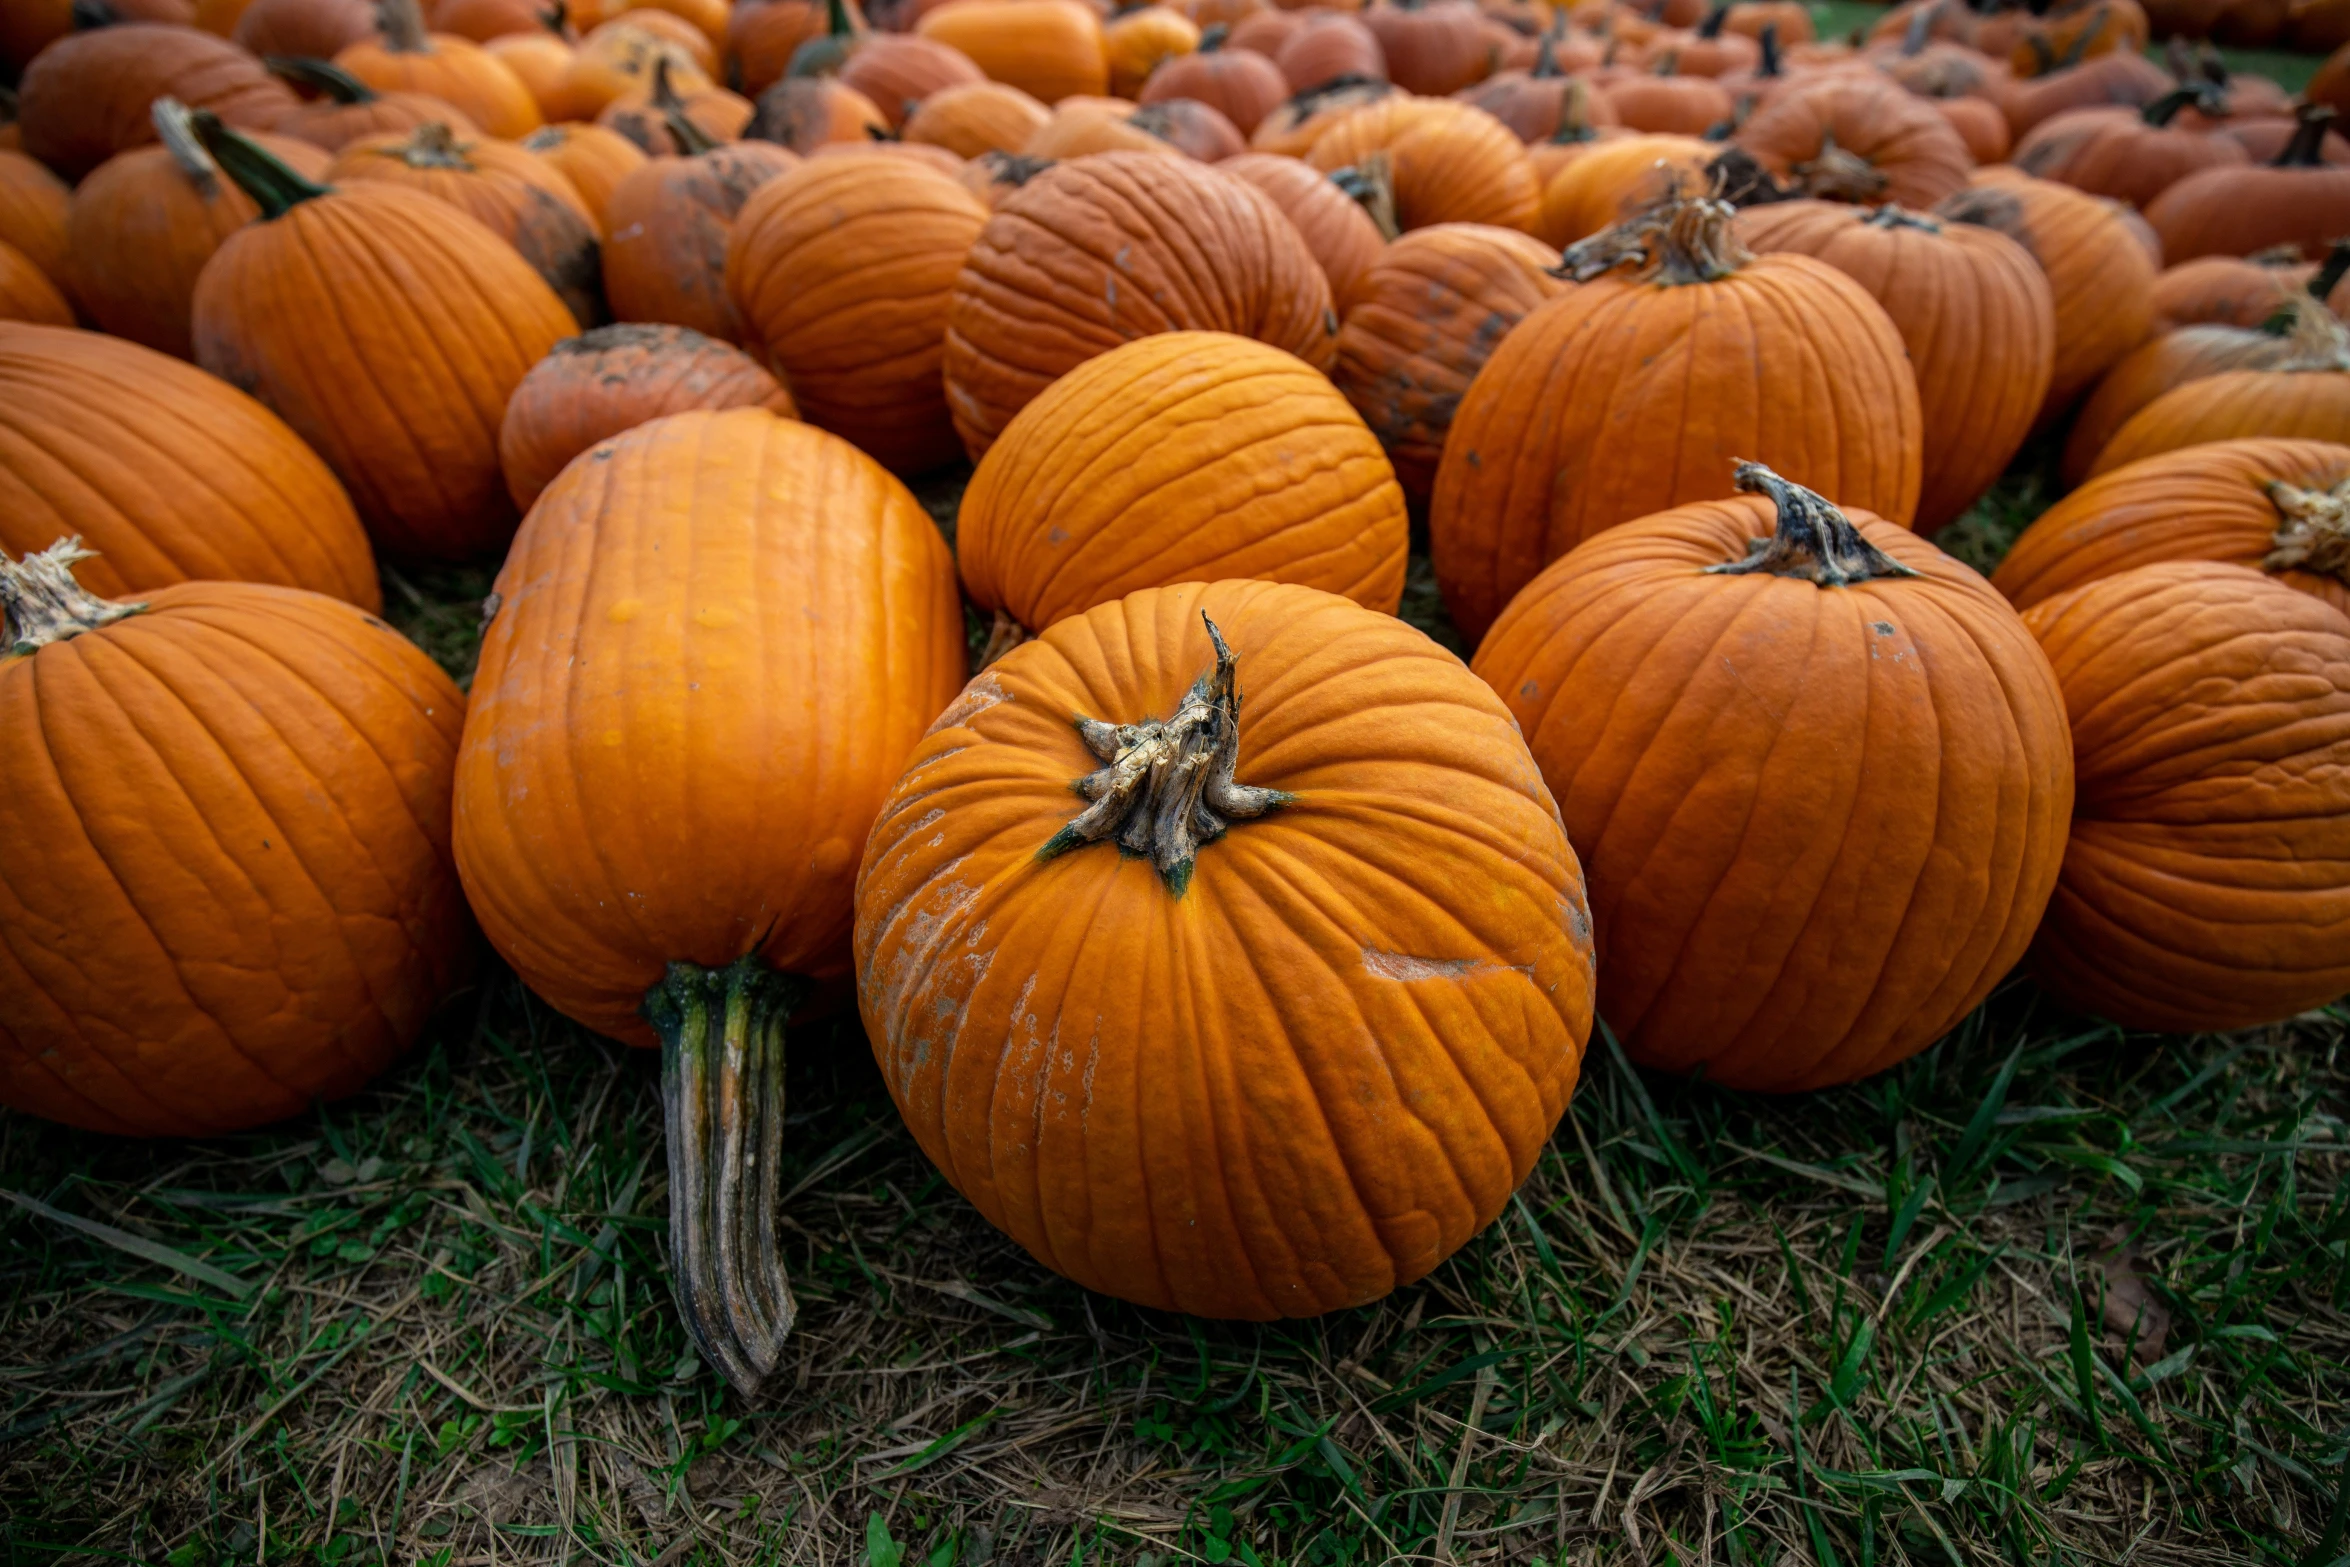 several large pumpkins in an area of grass